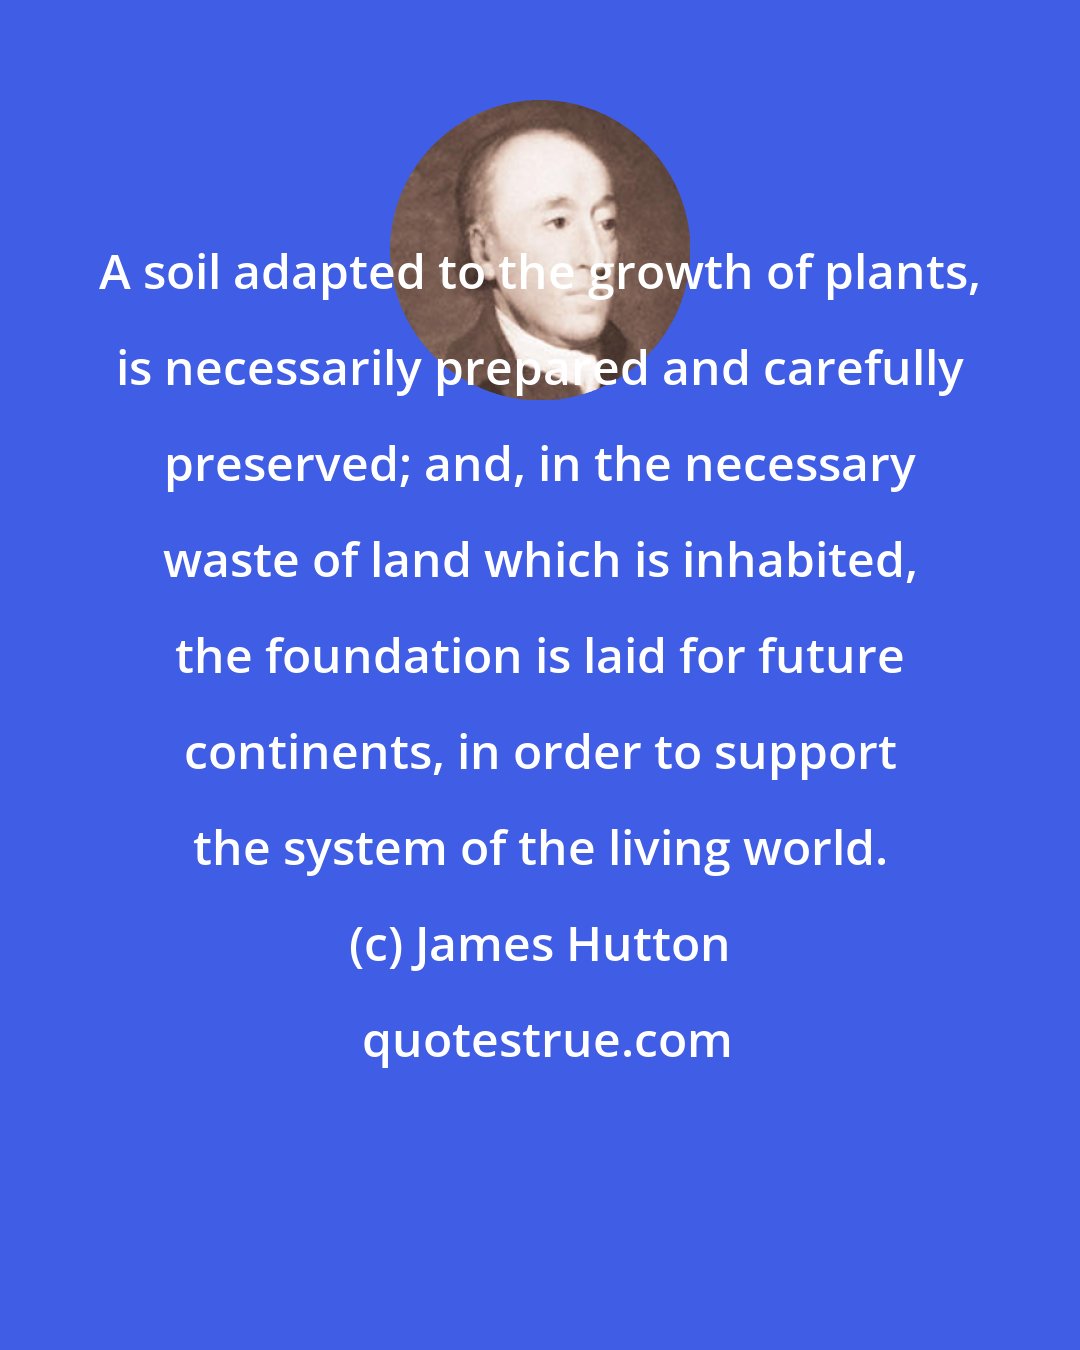 James Hutton: A soil adapted to the growth of plants, is necessarily prepared and carefully preserved; and, in the necessary waste of land which is inhabited, the foundation is laid for future continents, in order to support the system of the living world.